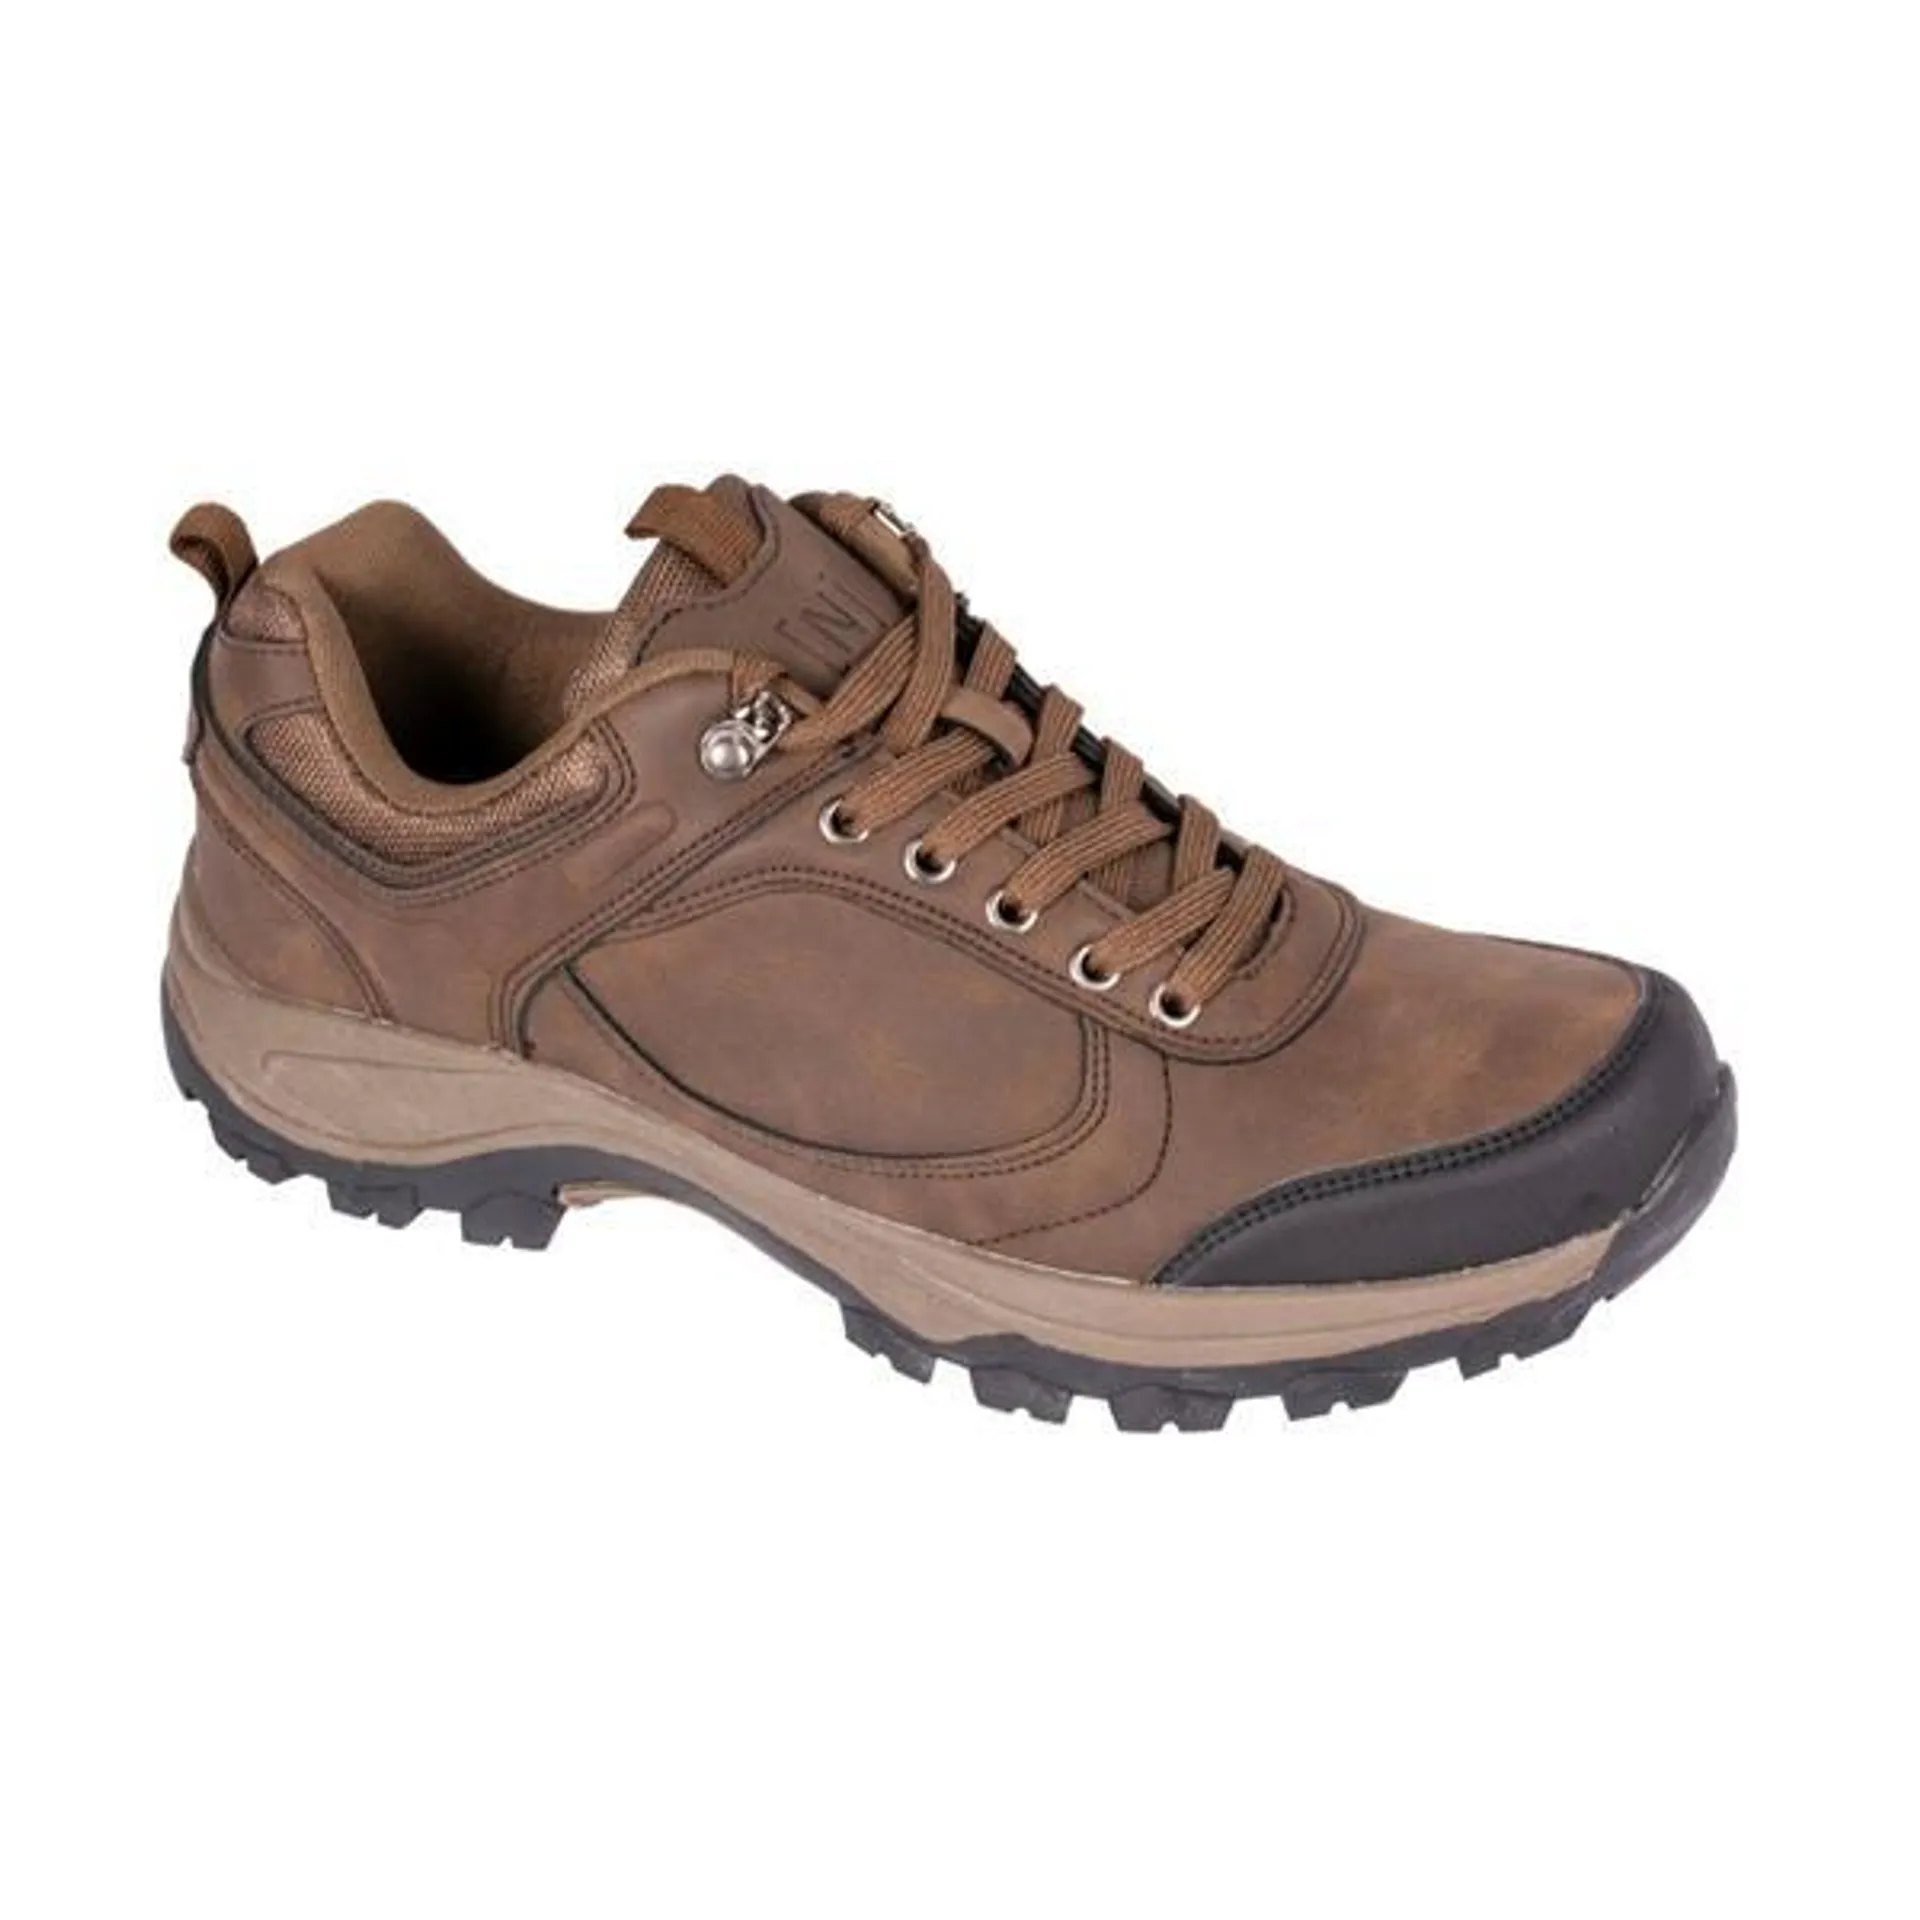 Men's Northland Hiking Shoes